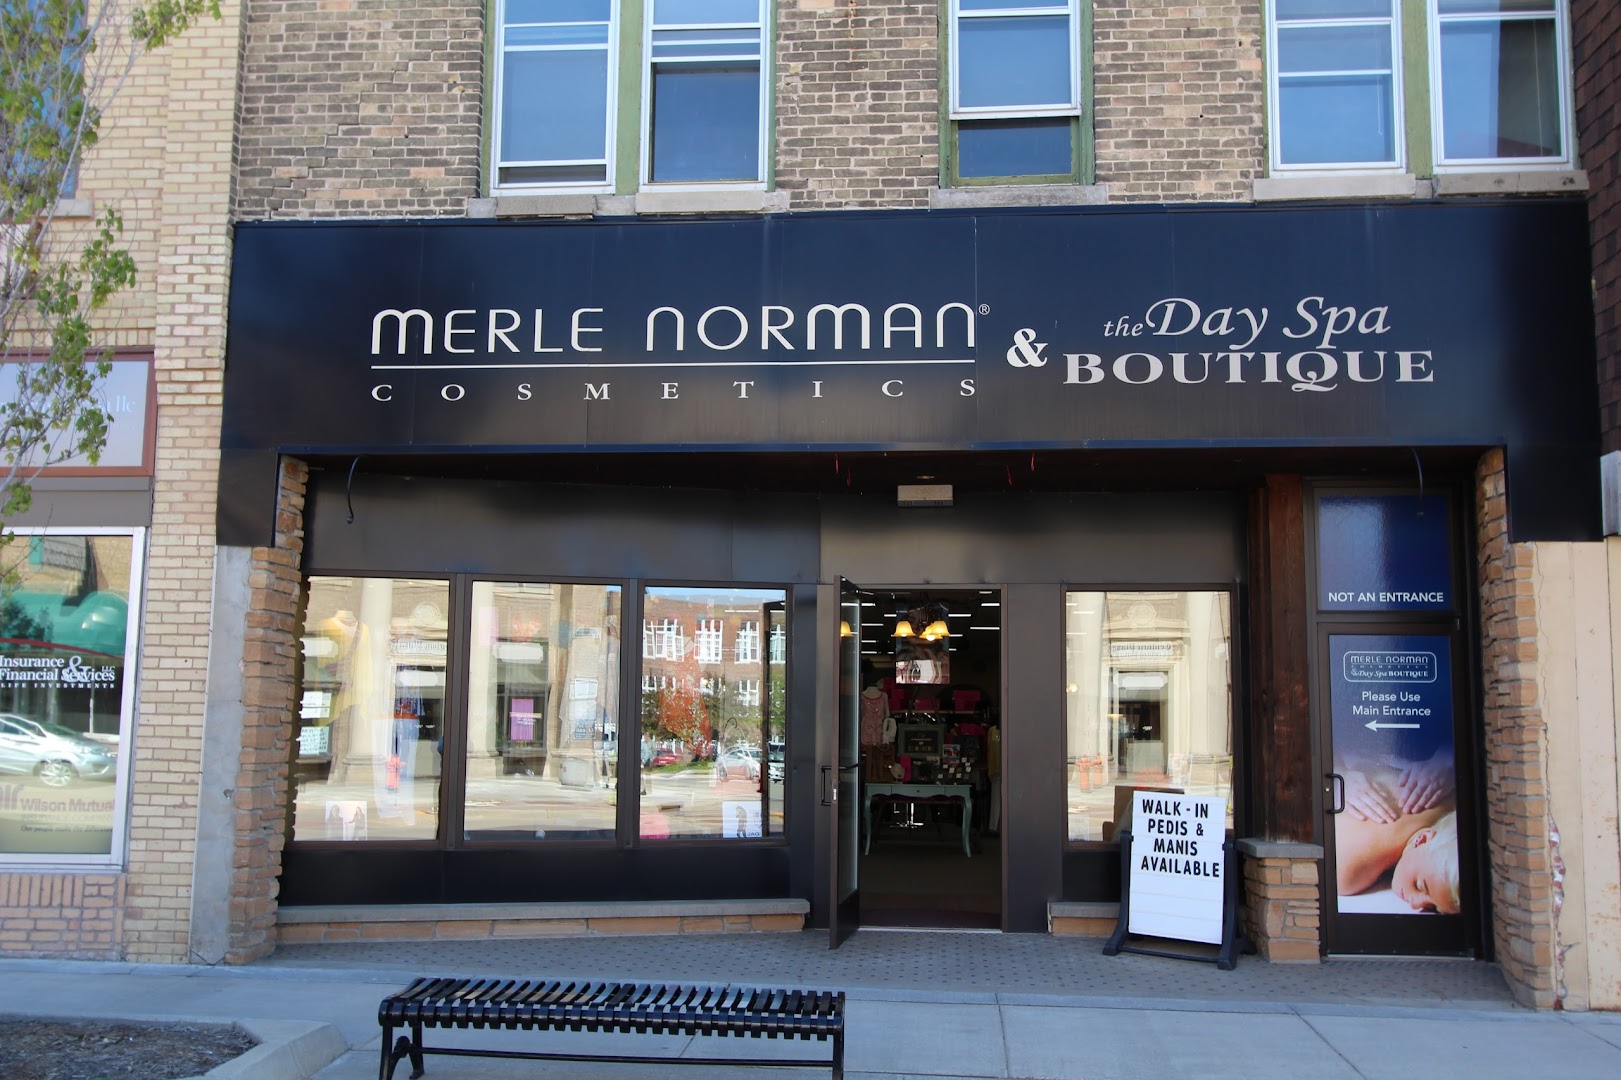 The Day Spa Boutique & Merle Norman Cosmetics